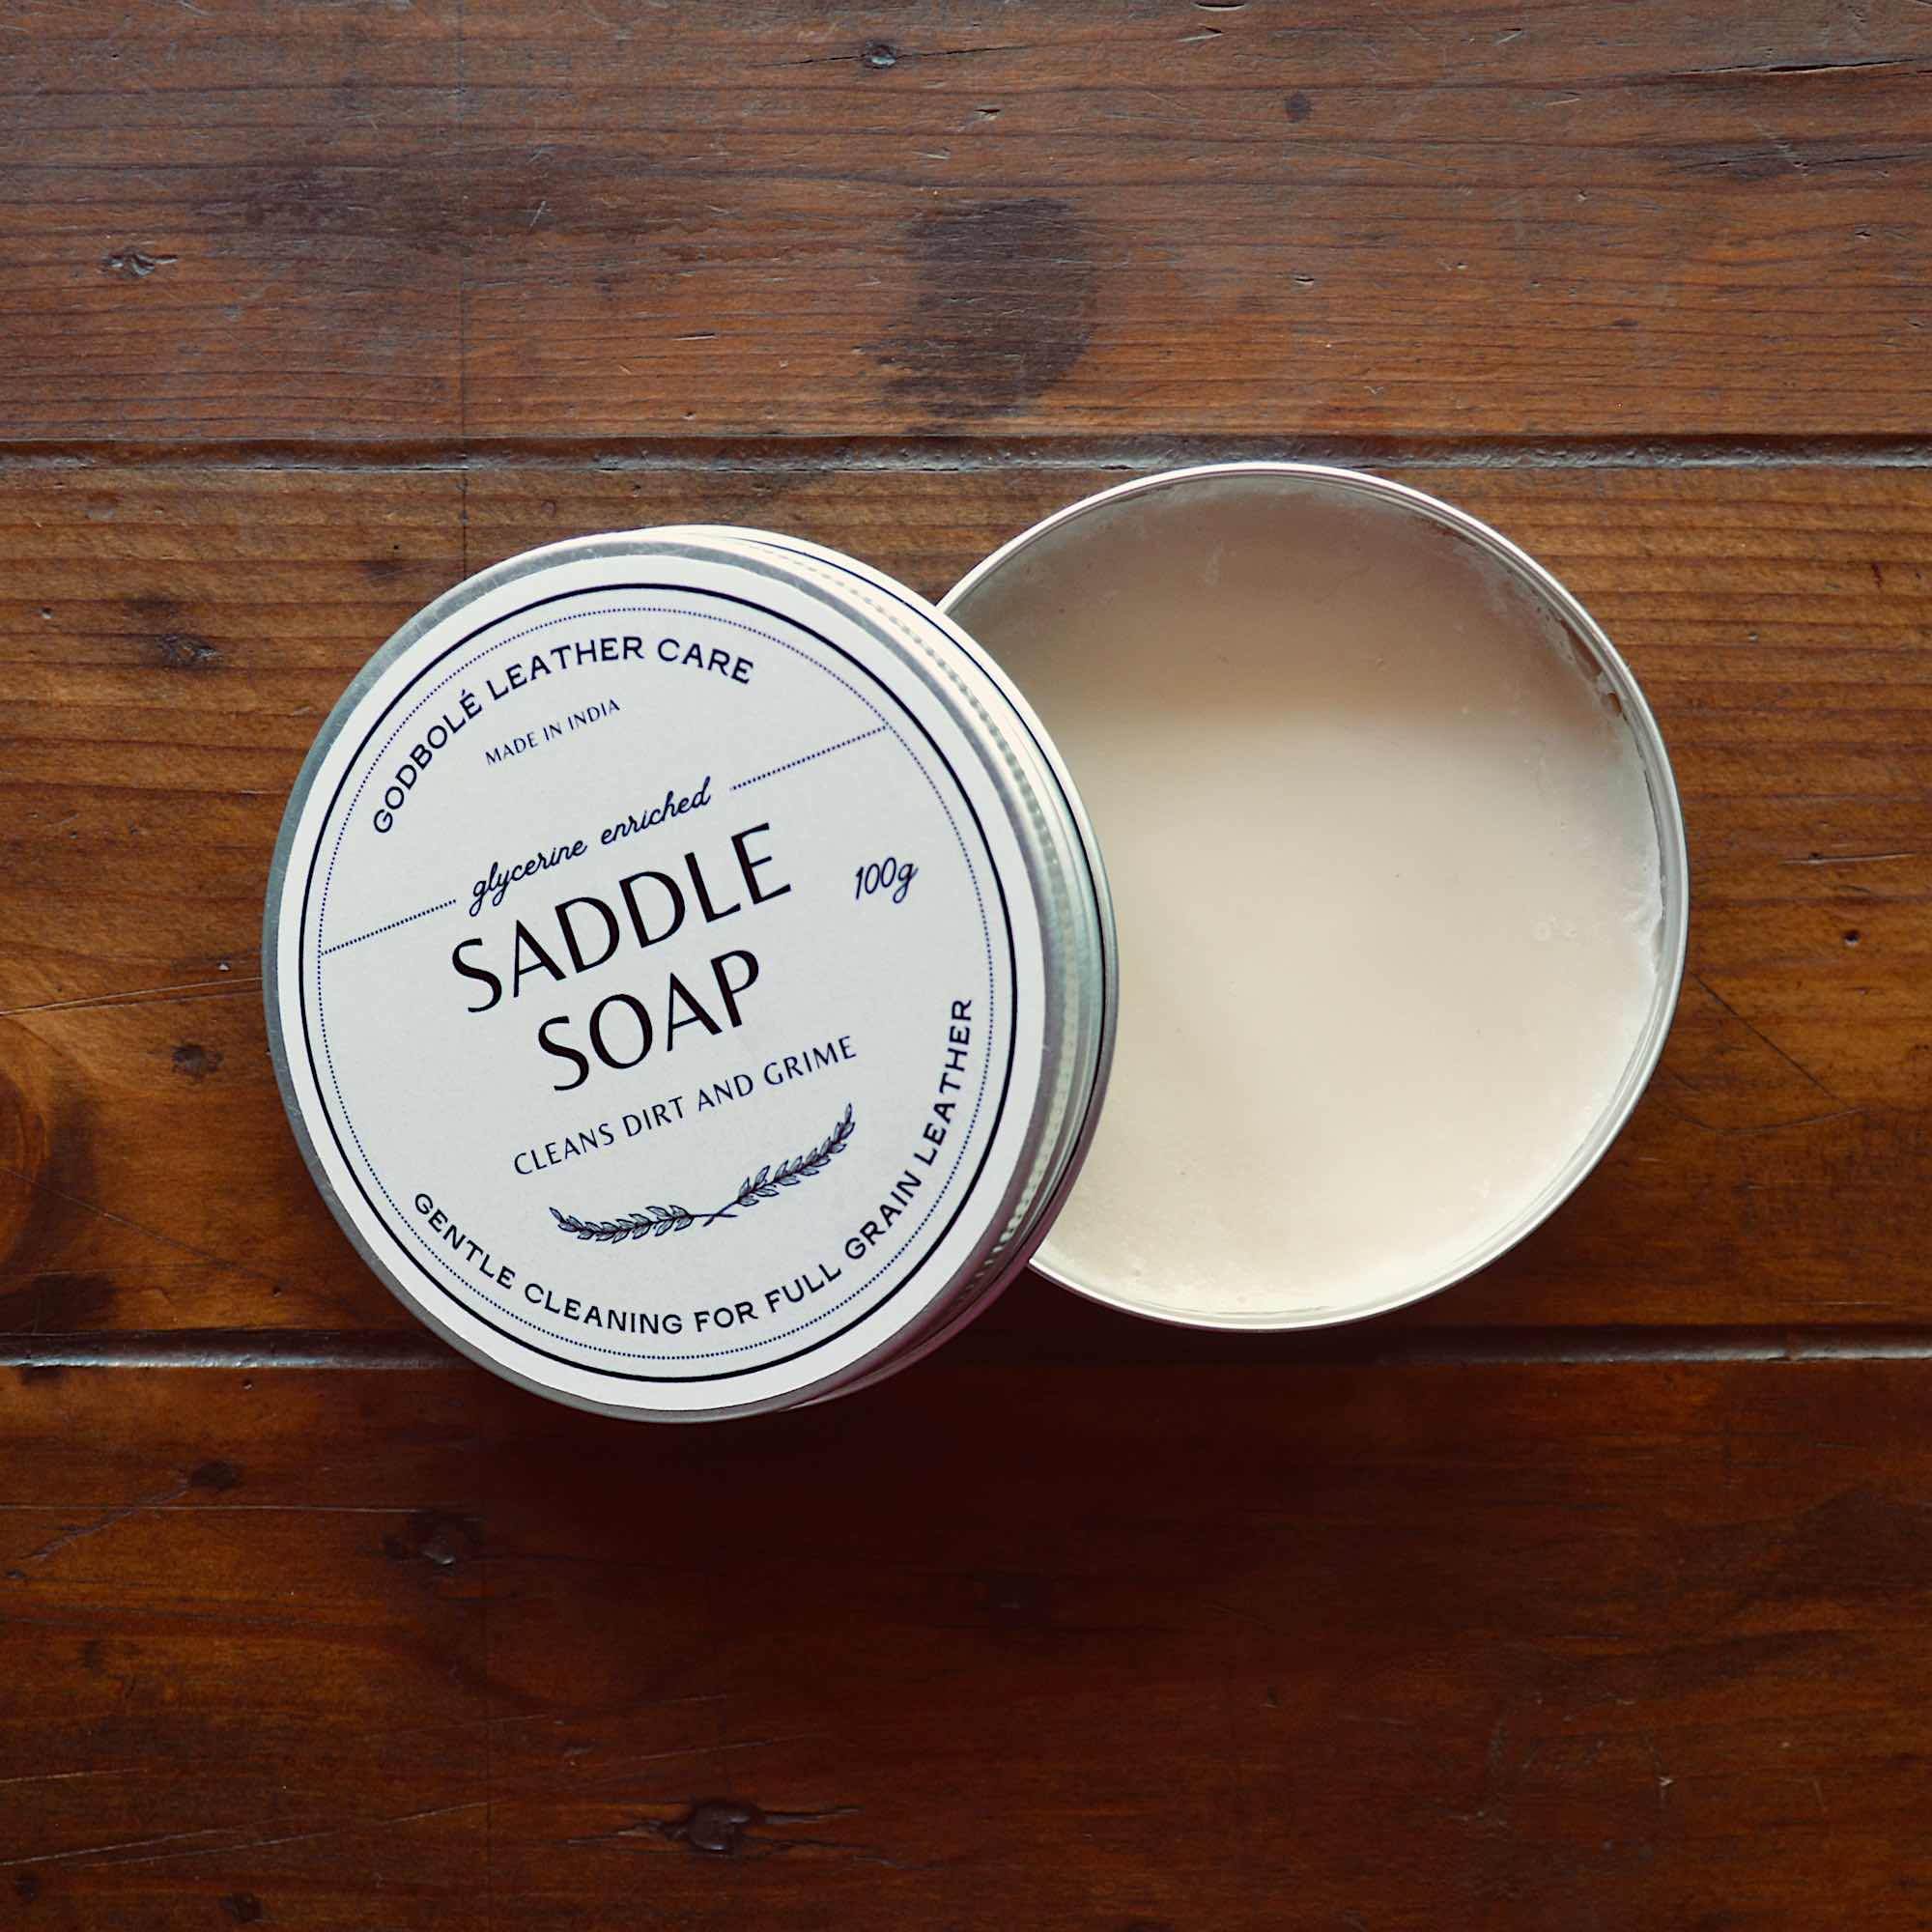 Introducing Authentic Leather Balm and Saddle Soap – Godbole Gear